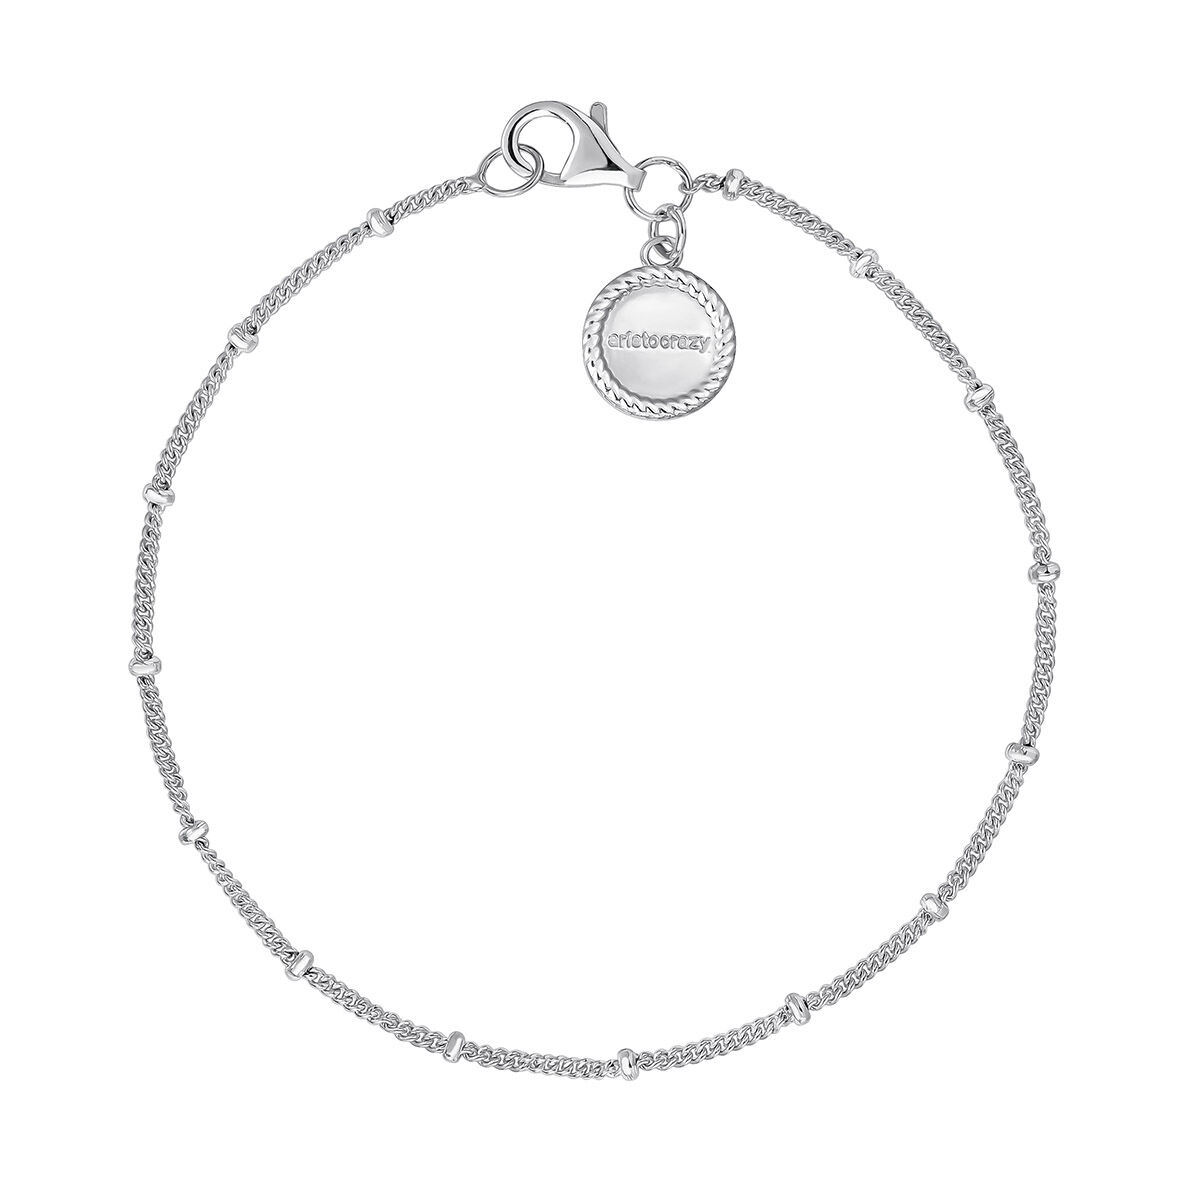 Ball chain bracelet in gold-plated silver, J05110-02, hi-res